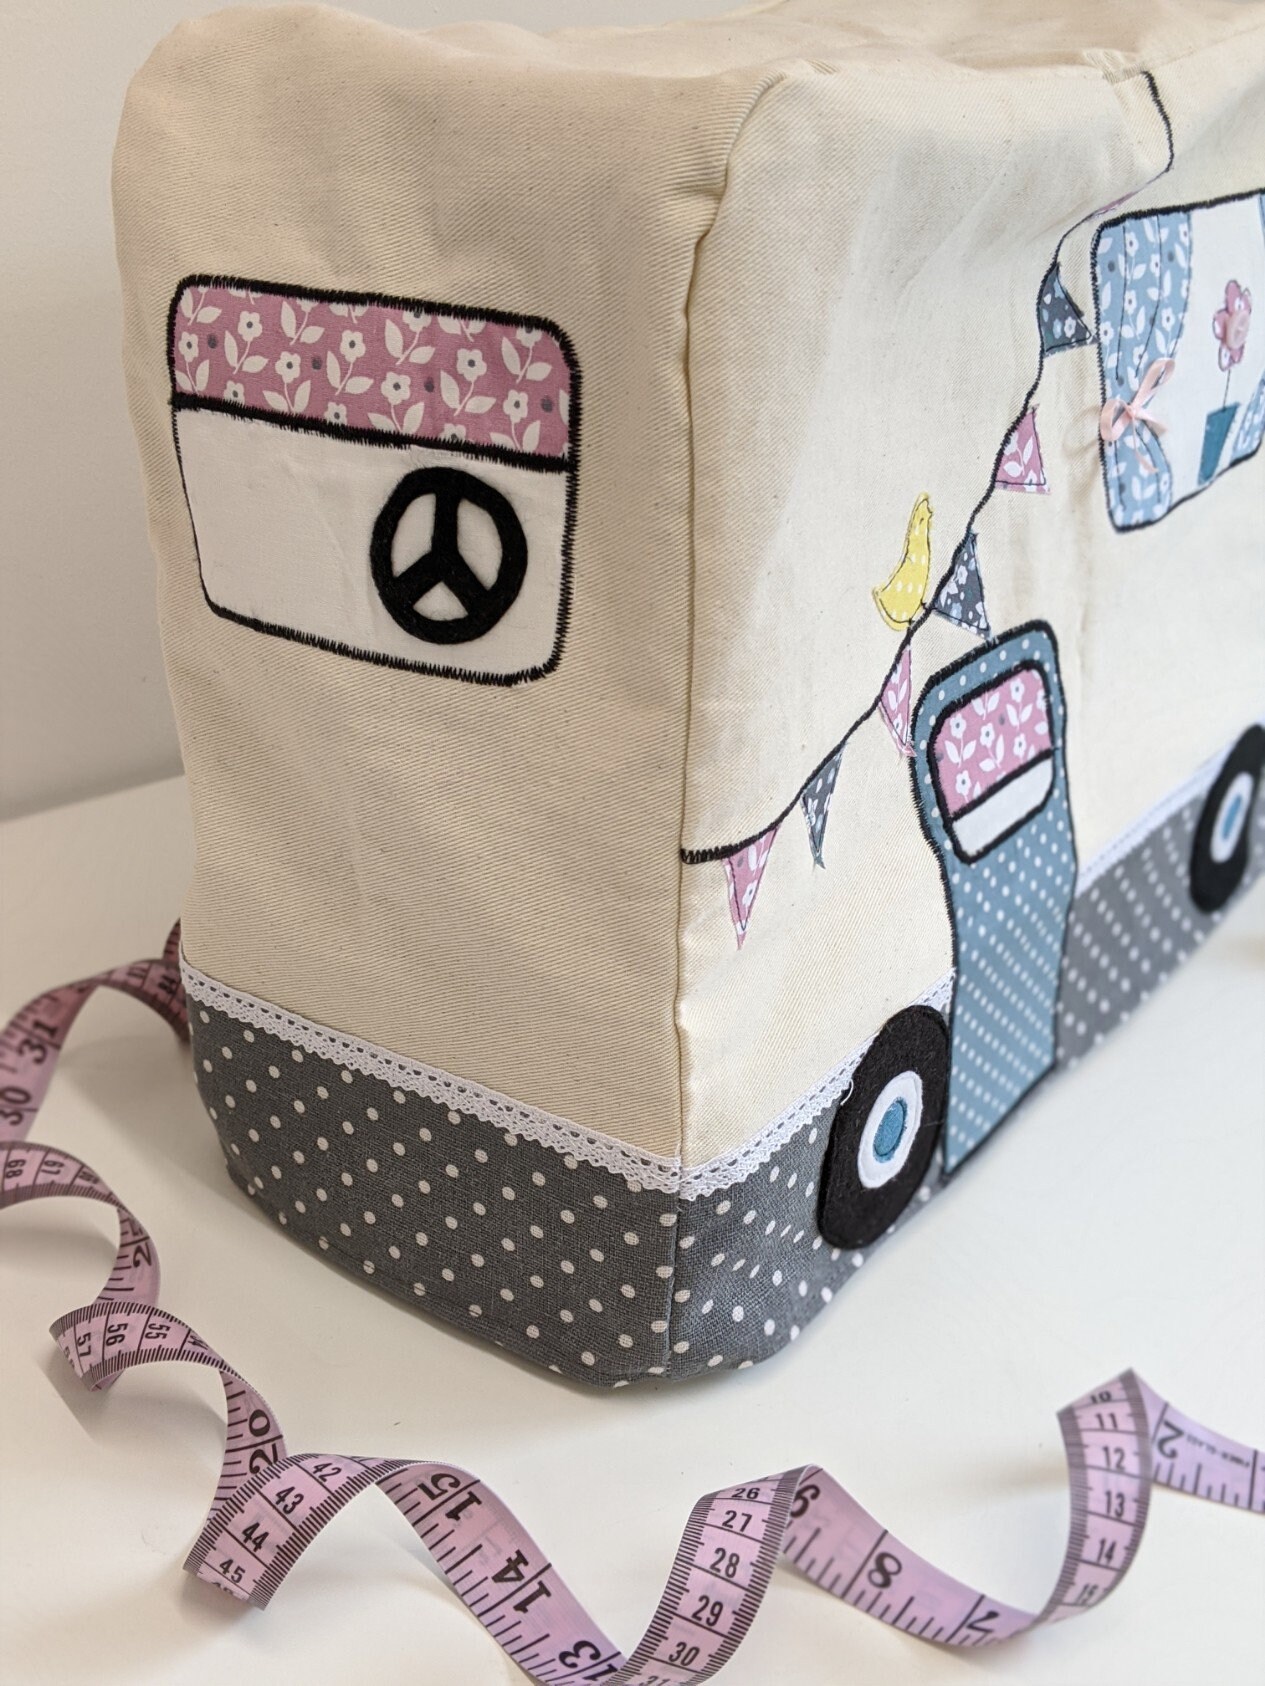 Campervan Fabric Sewing Machine Cover Pattern: PDF Download. 